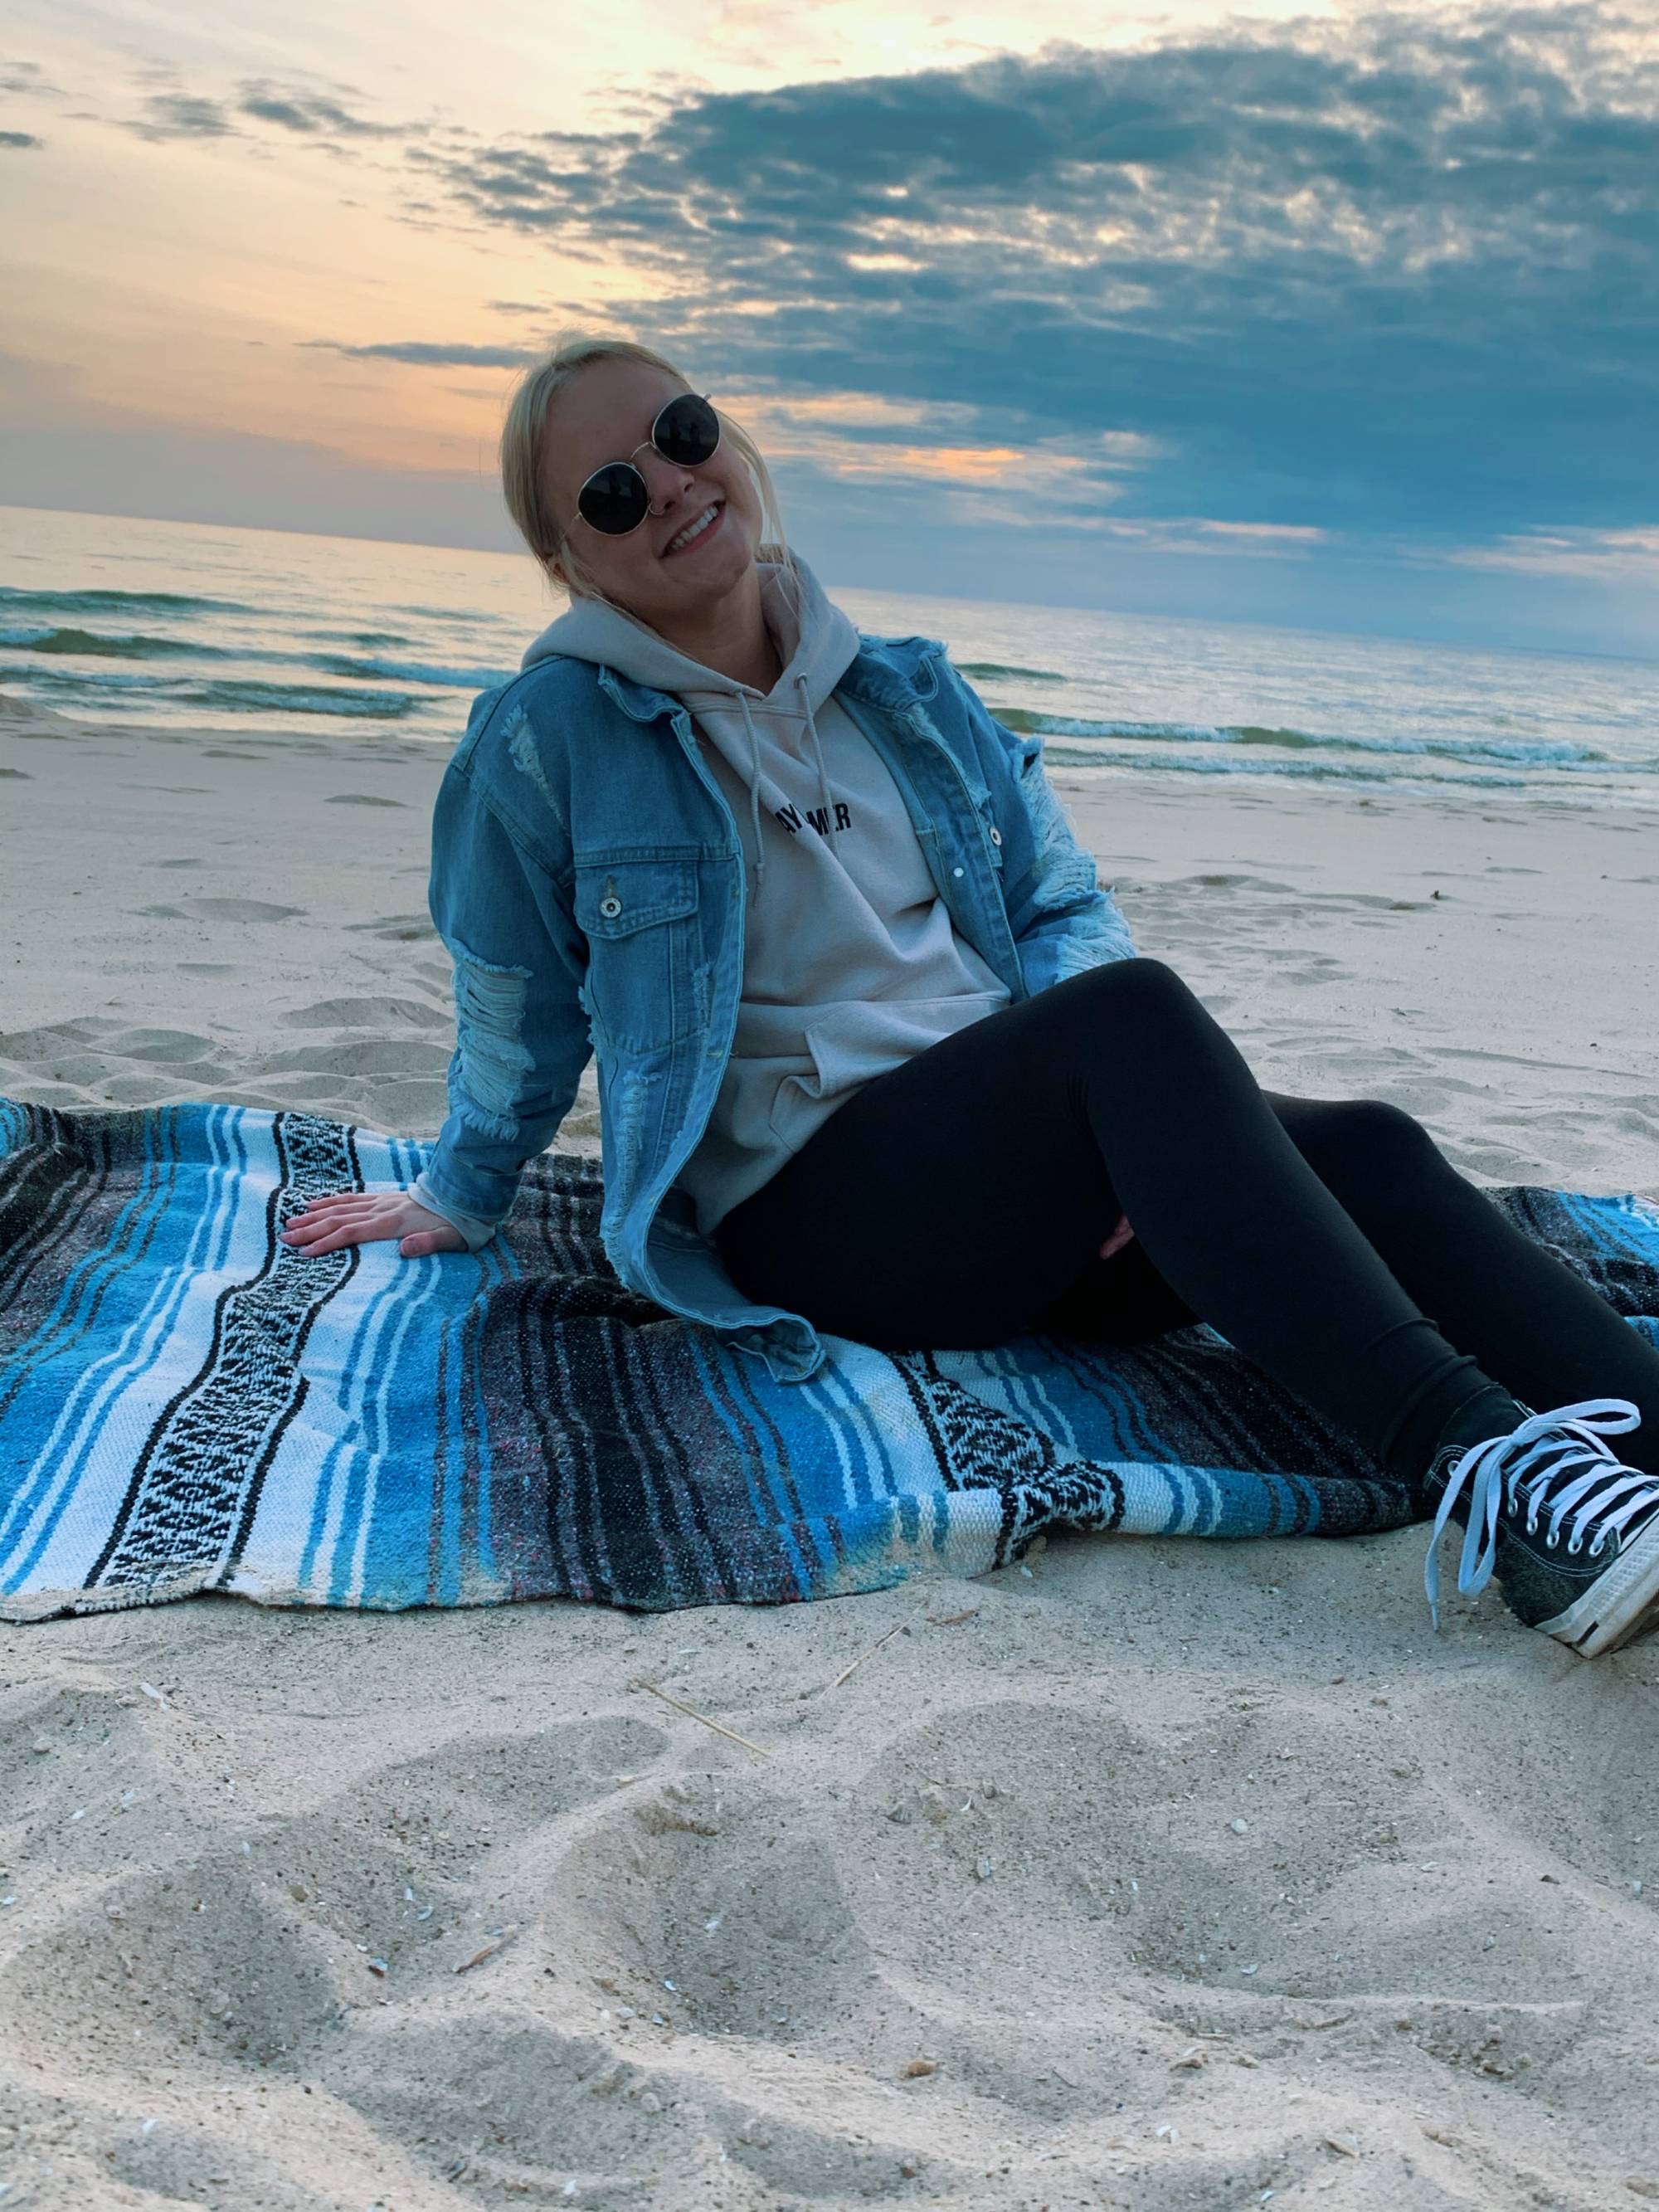 Girl sitting on the beach on a blanket wearing sunglasses, a denim jacket and black pants. There is a sunset in the background.